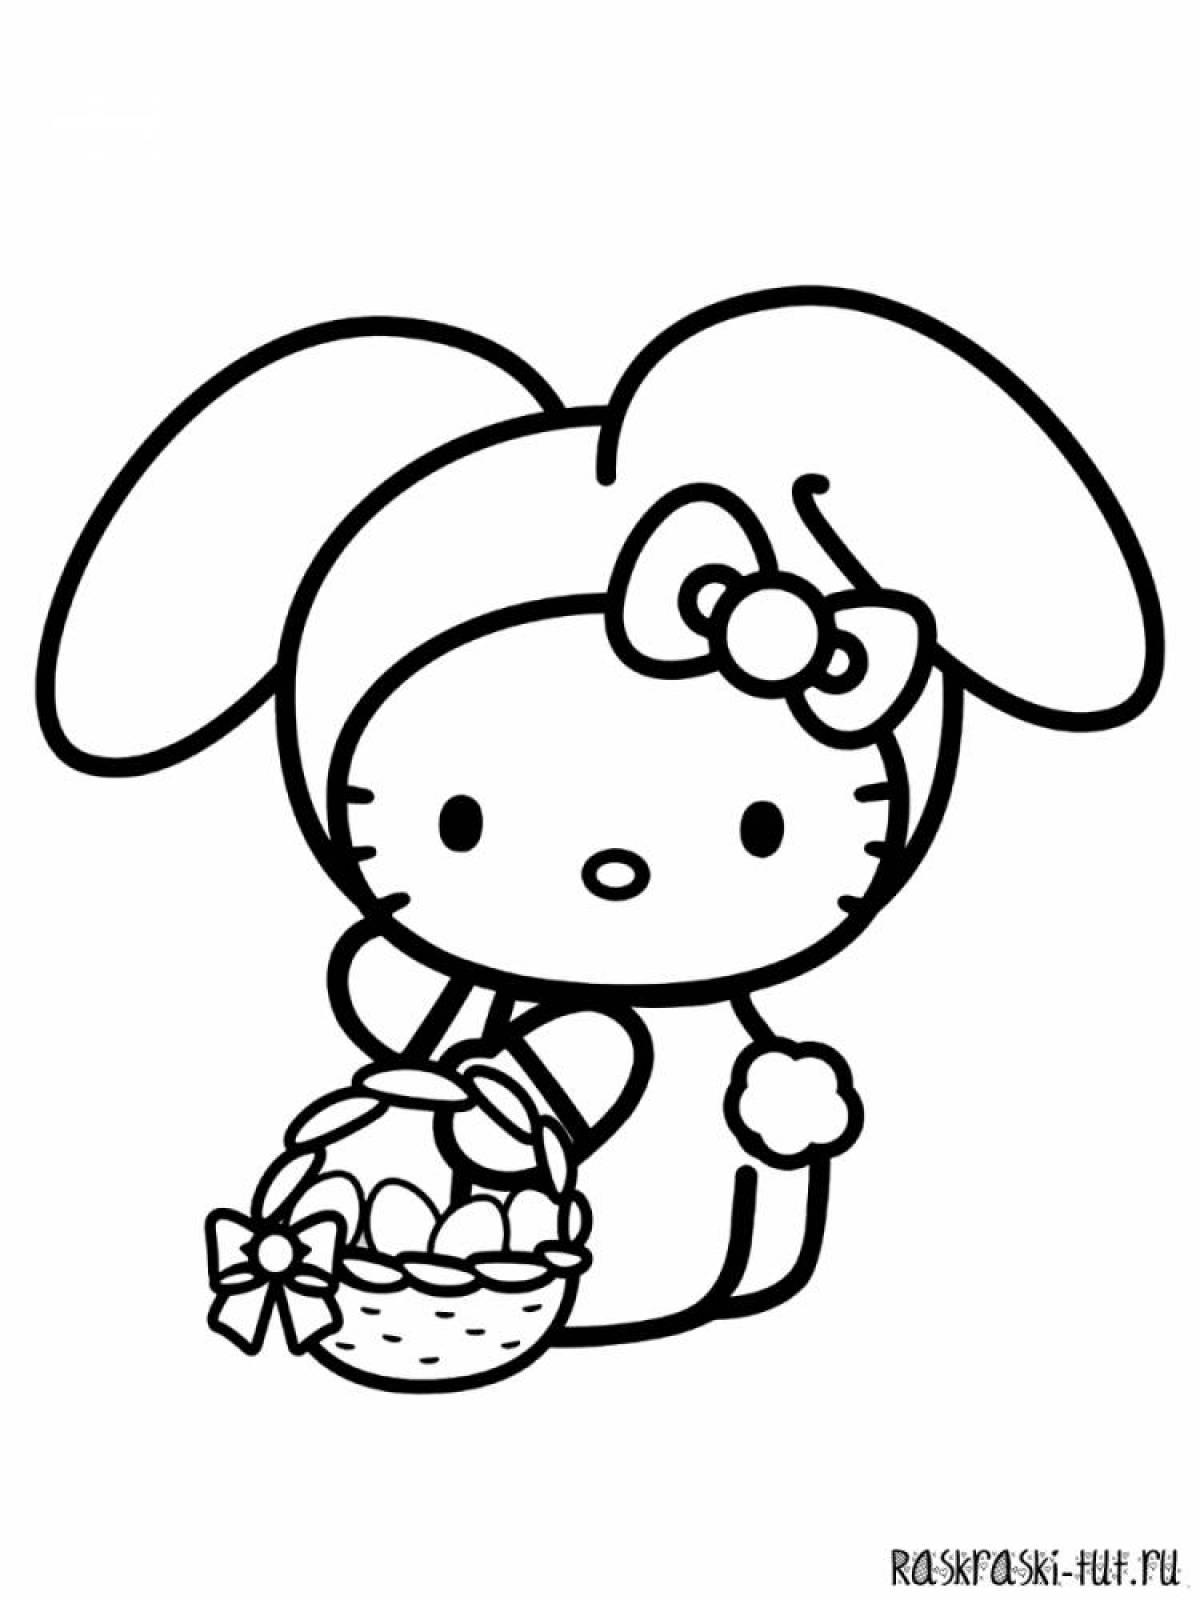 Bright kuromi and hello kitty coloring book